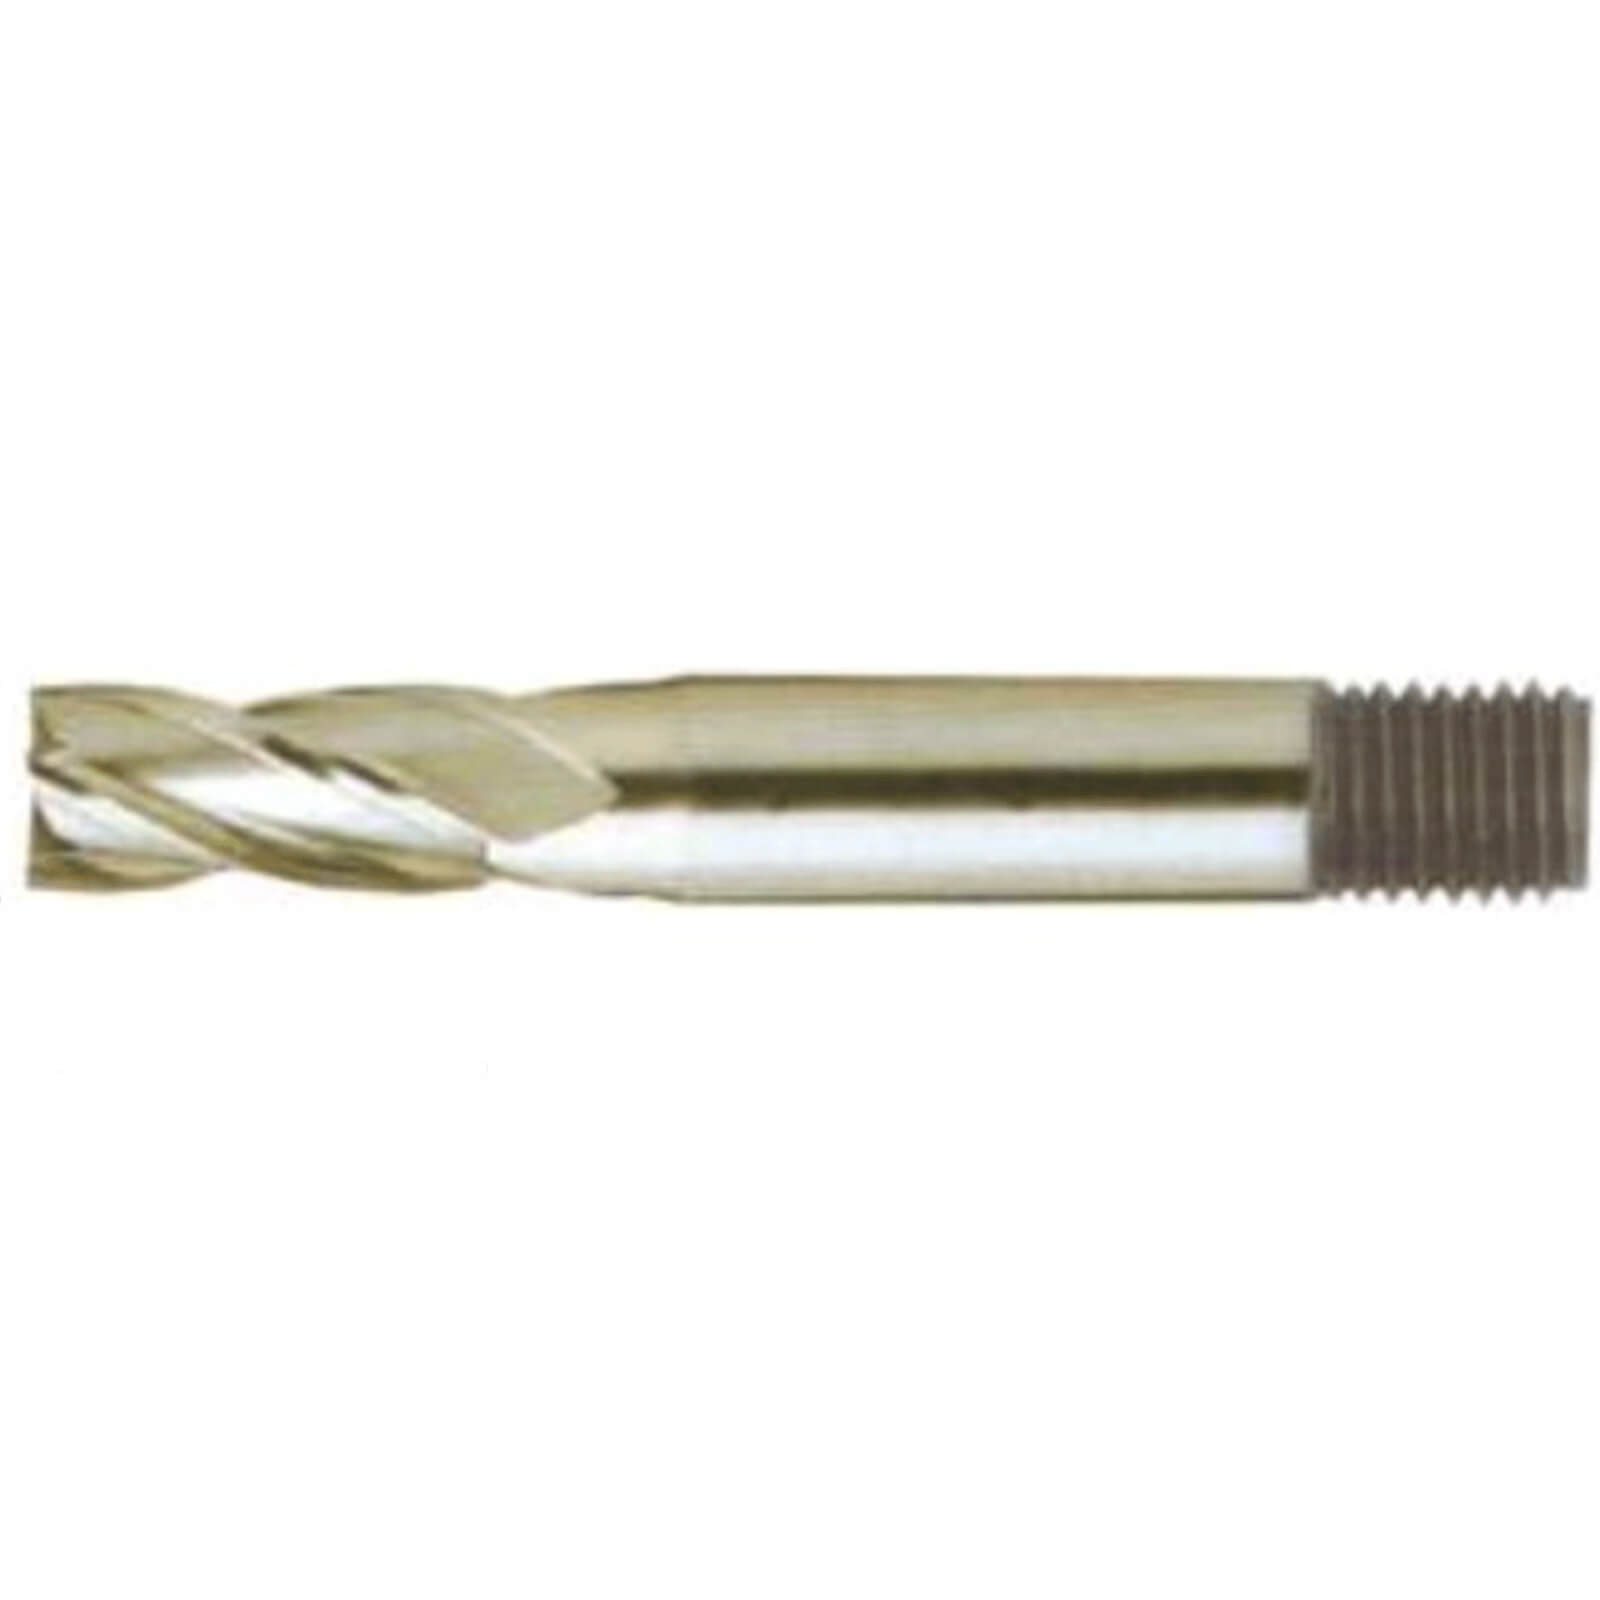 Image of Clarkson M42 Screwed Shank End Mill 3mm